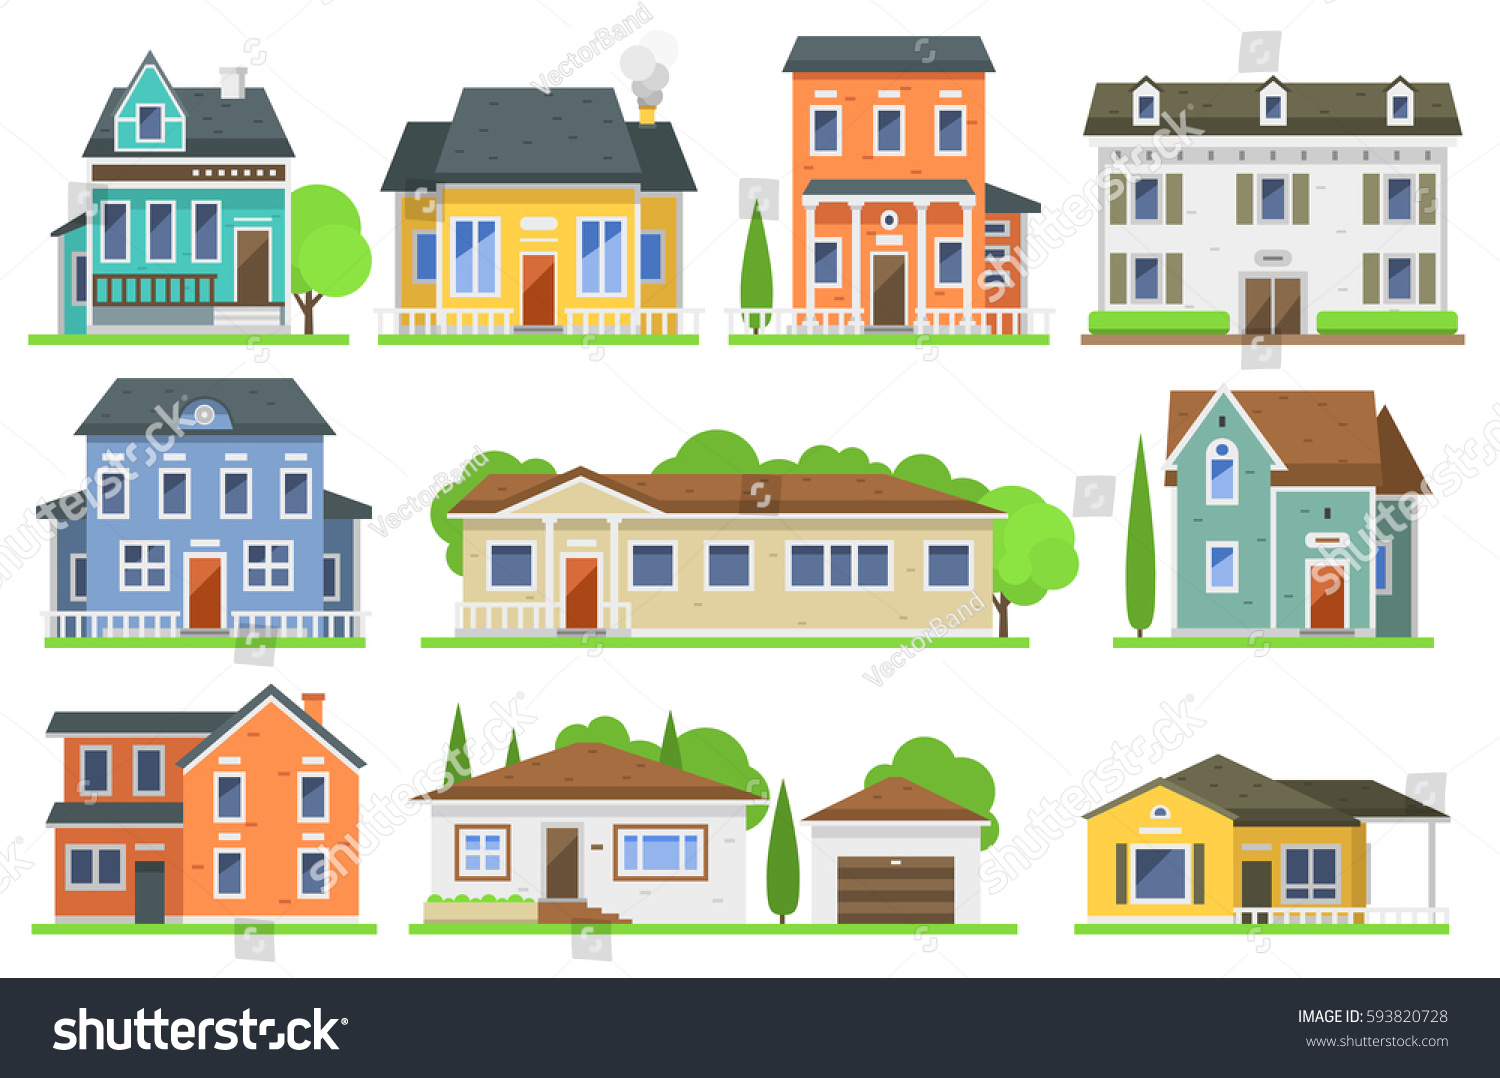 Houses exterior vector illustration front view with roof. Modern. Townhouse building apartment. Home facade with doors and windows. #593820728